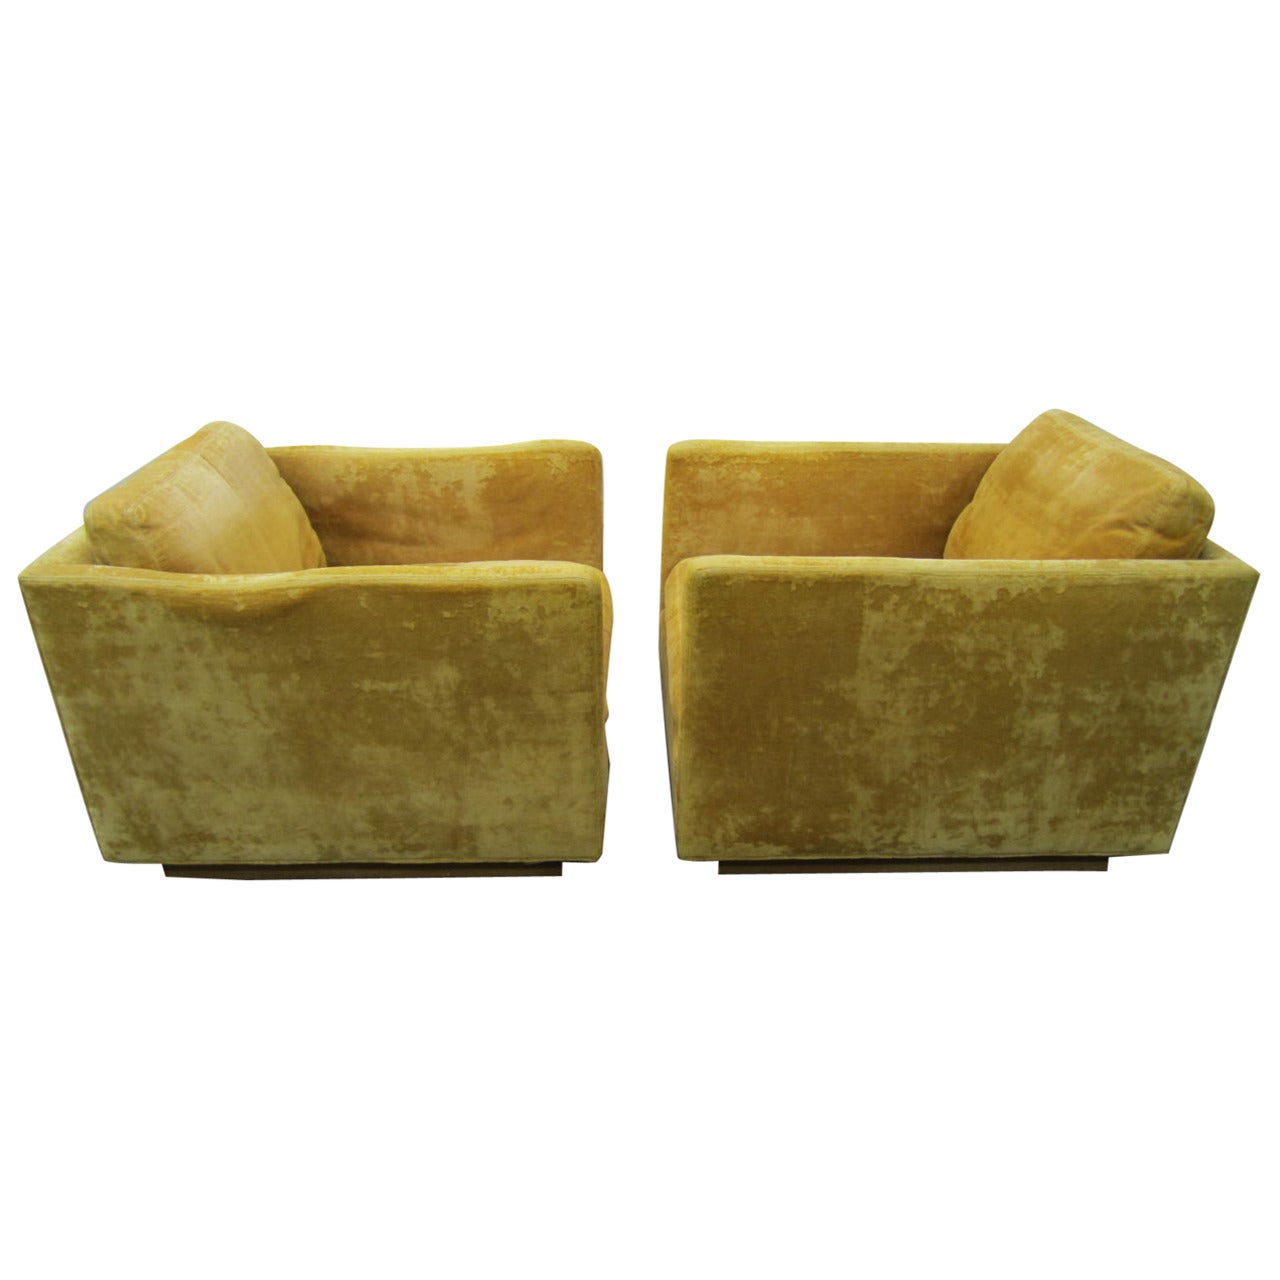 Fantastic Pair of Signed Milo Baughman Cube Lounge Chairs for James Inc.